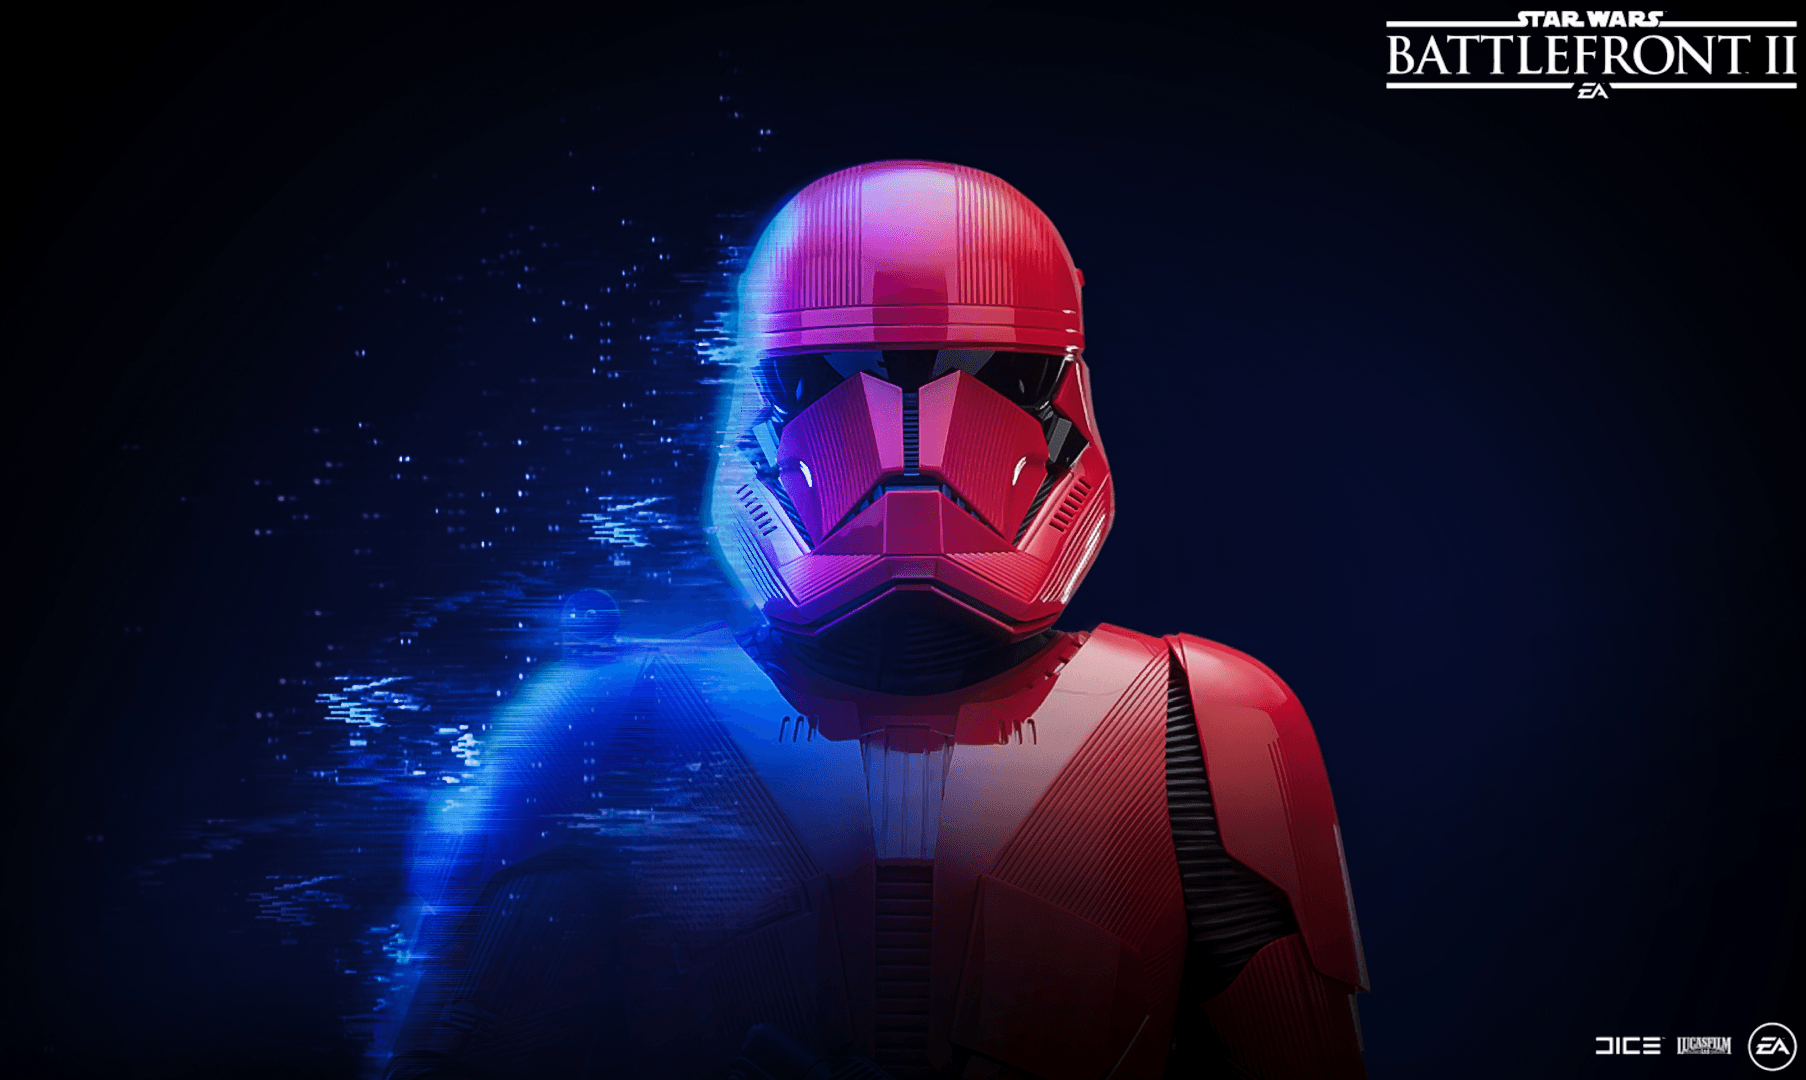 Sith Trooper roster made by me in Photohop